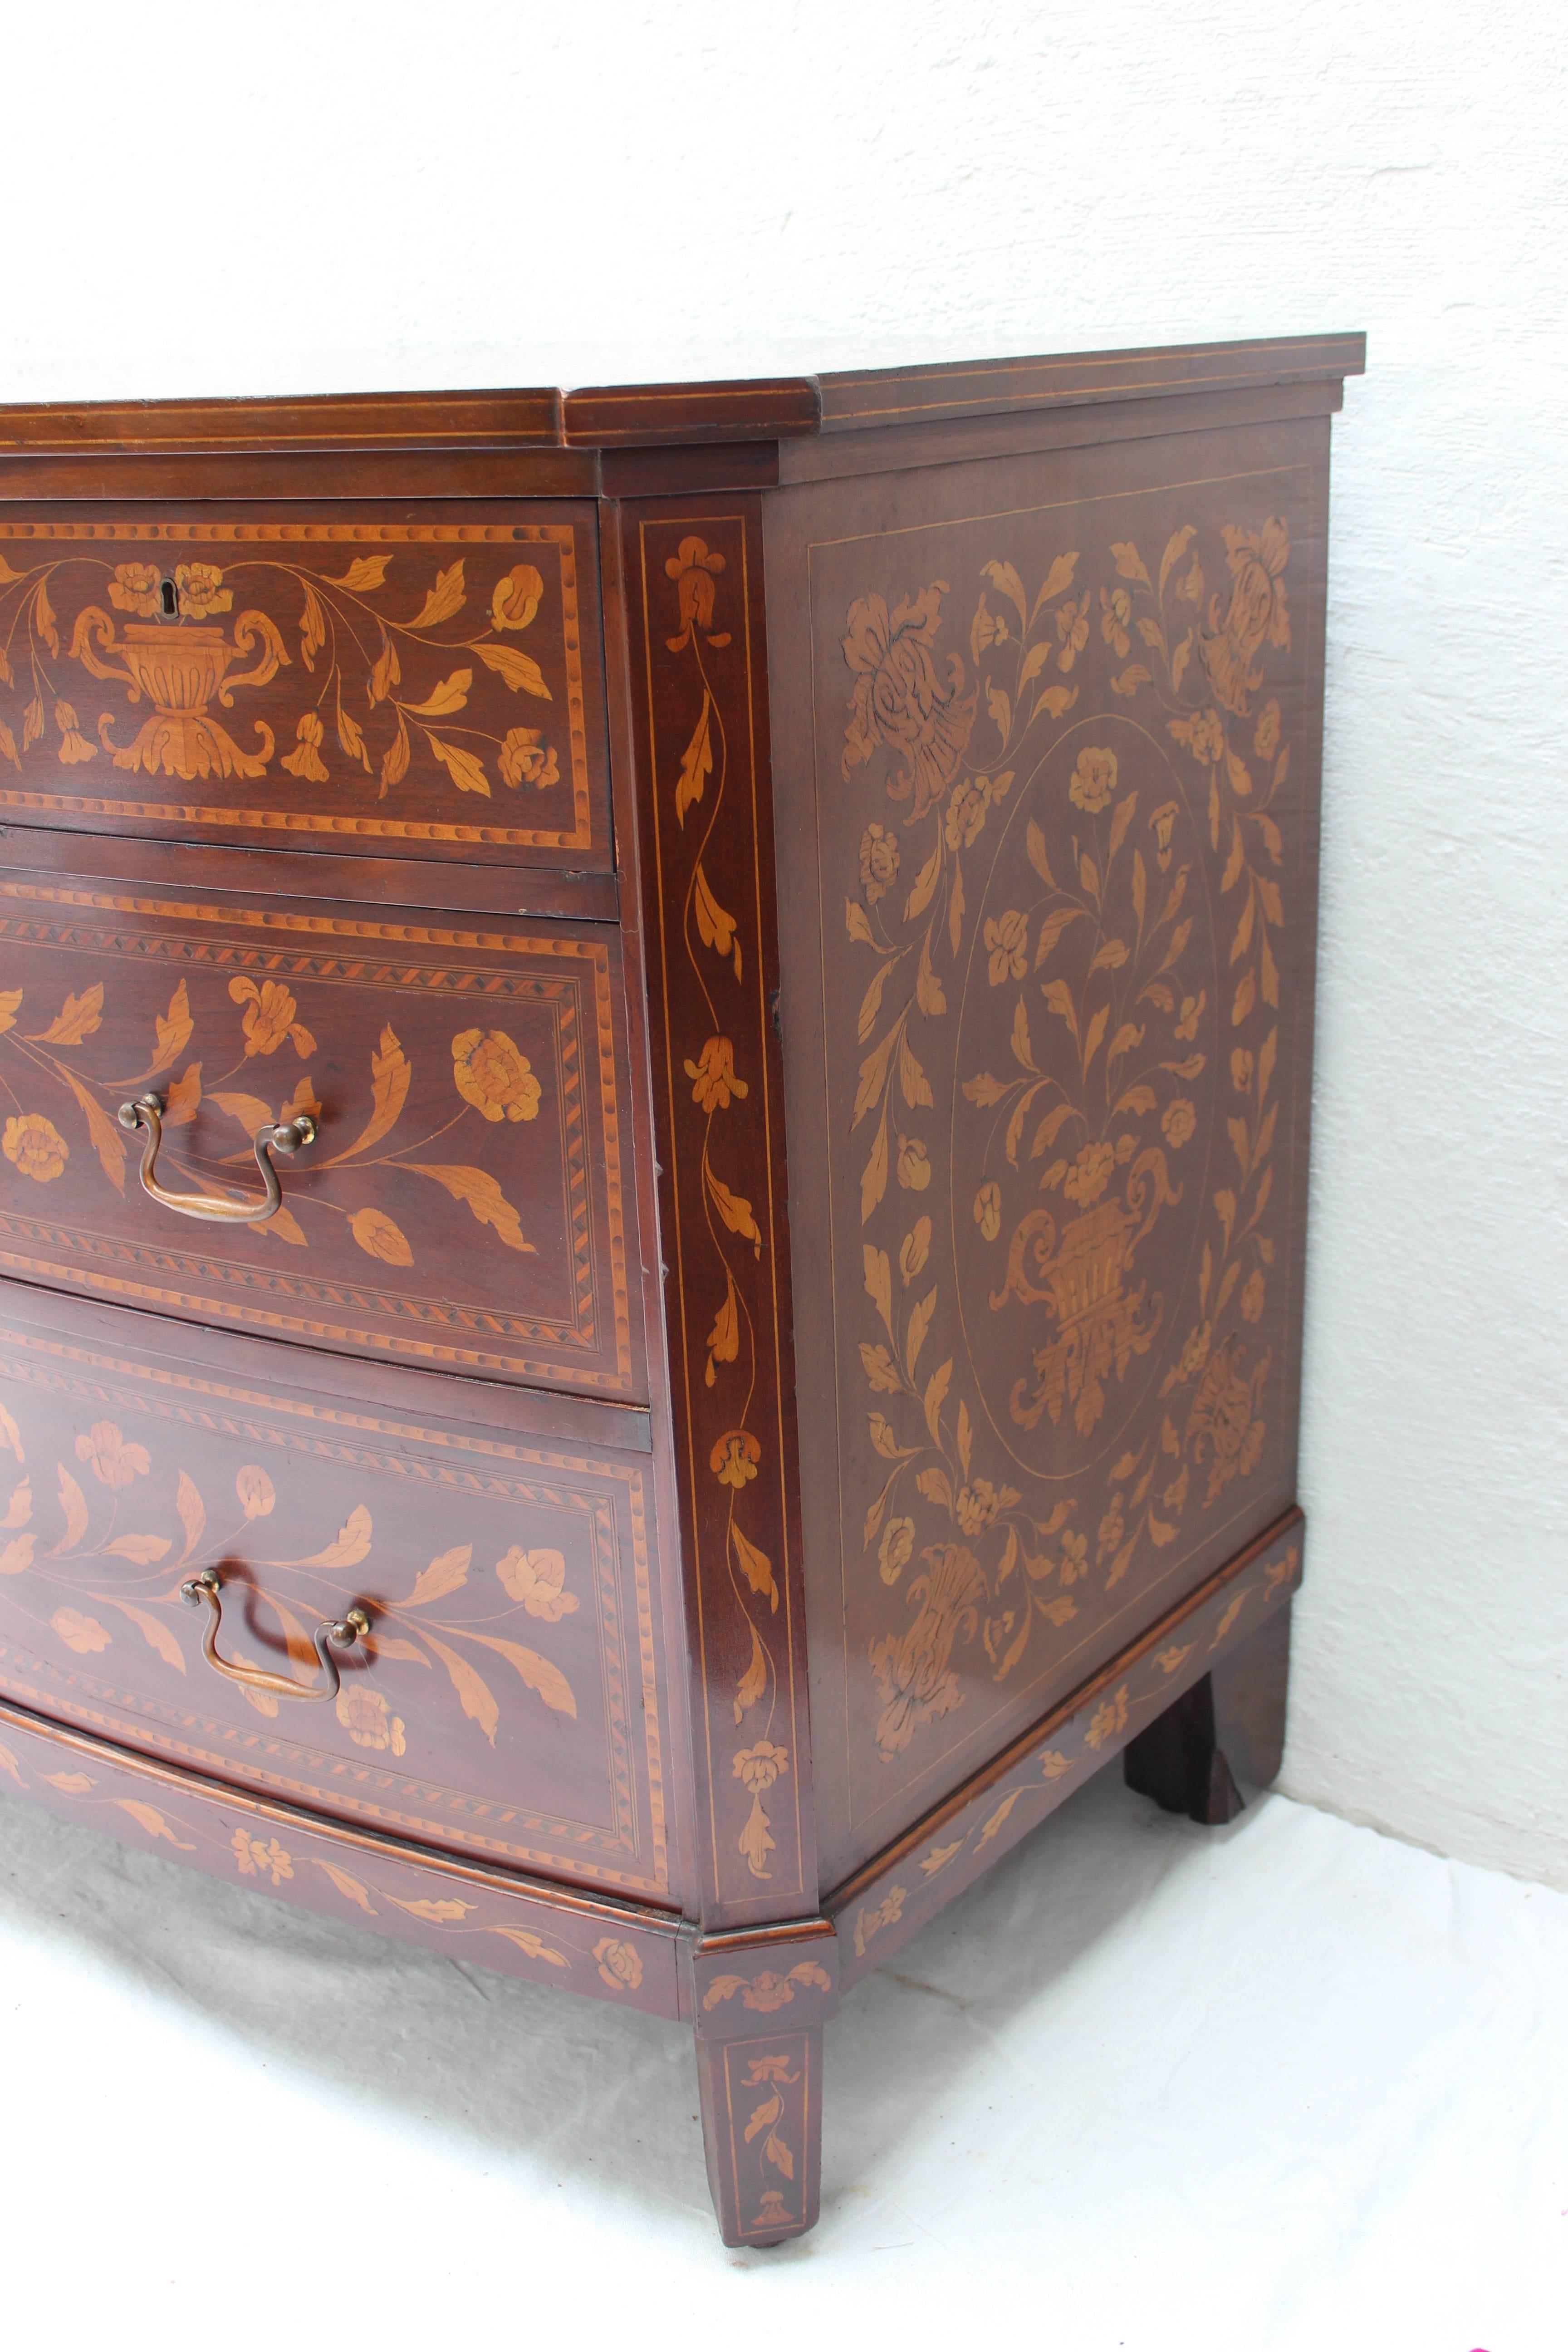 Dutch Inlaid Chest In Excellent Condition For Sale In East Hampton, NY